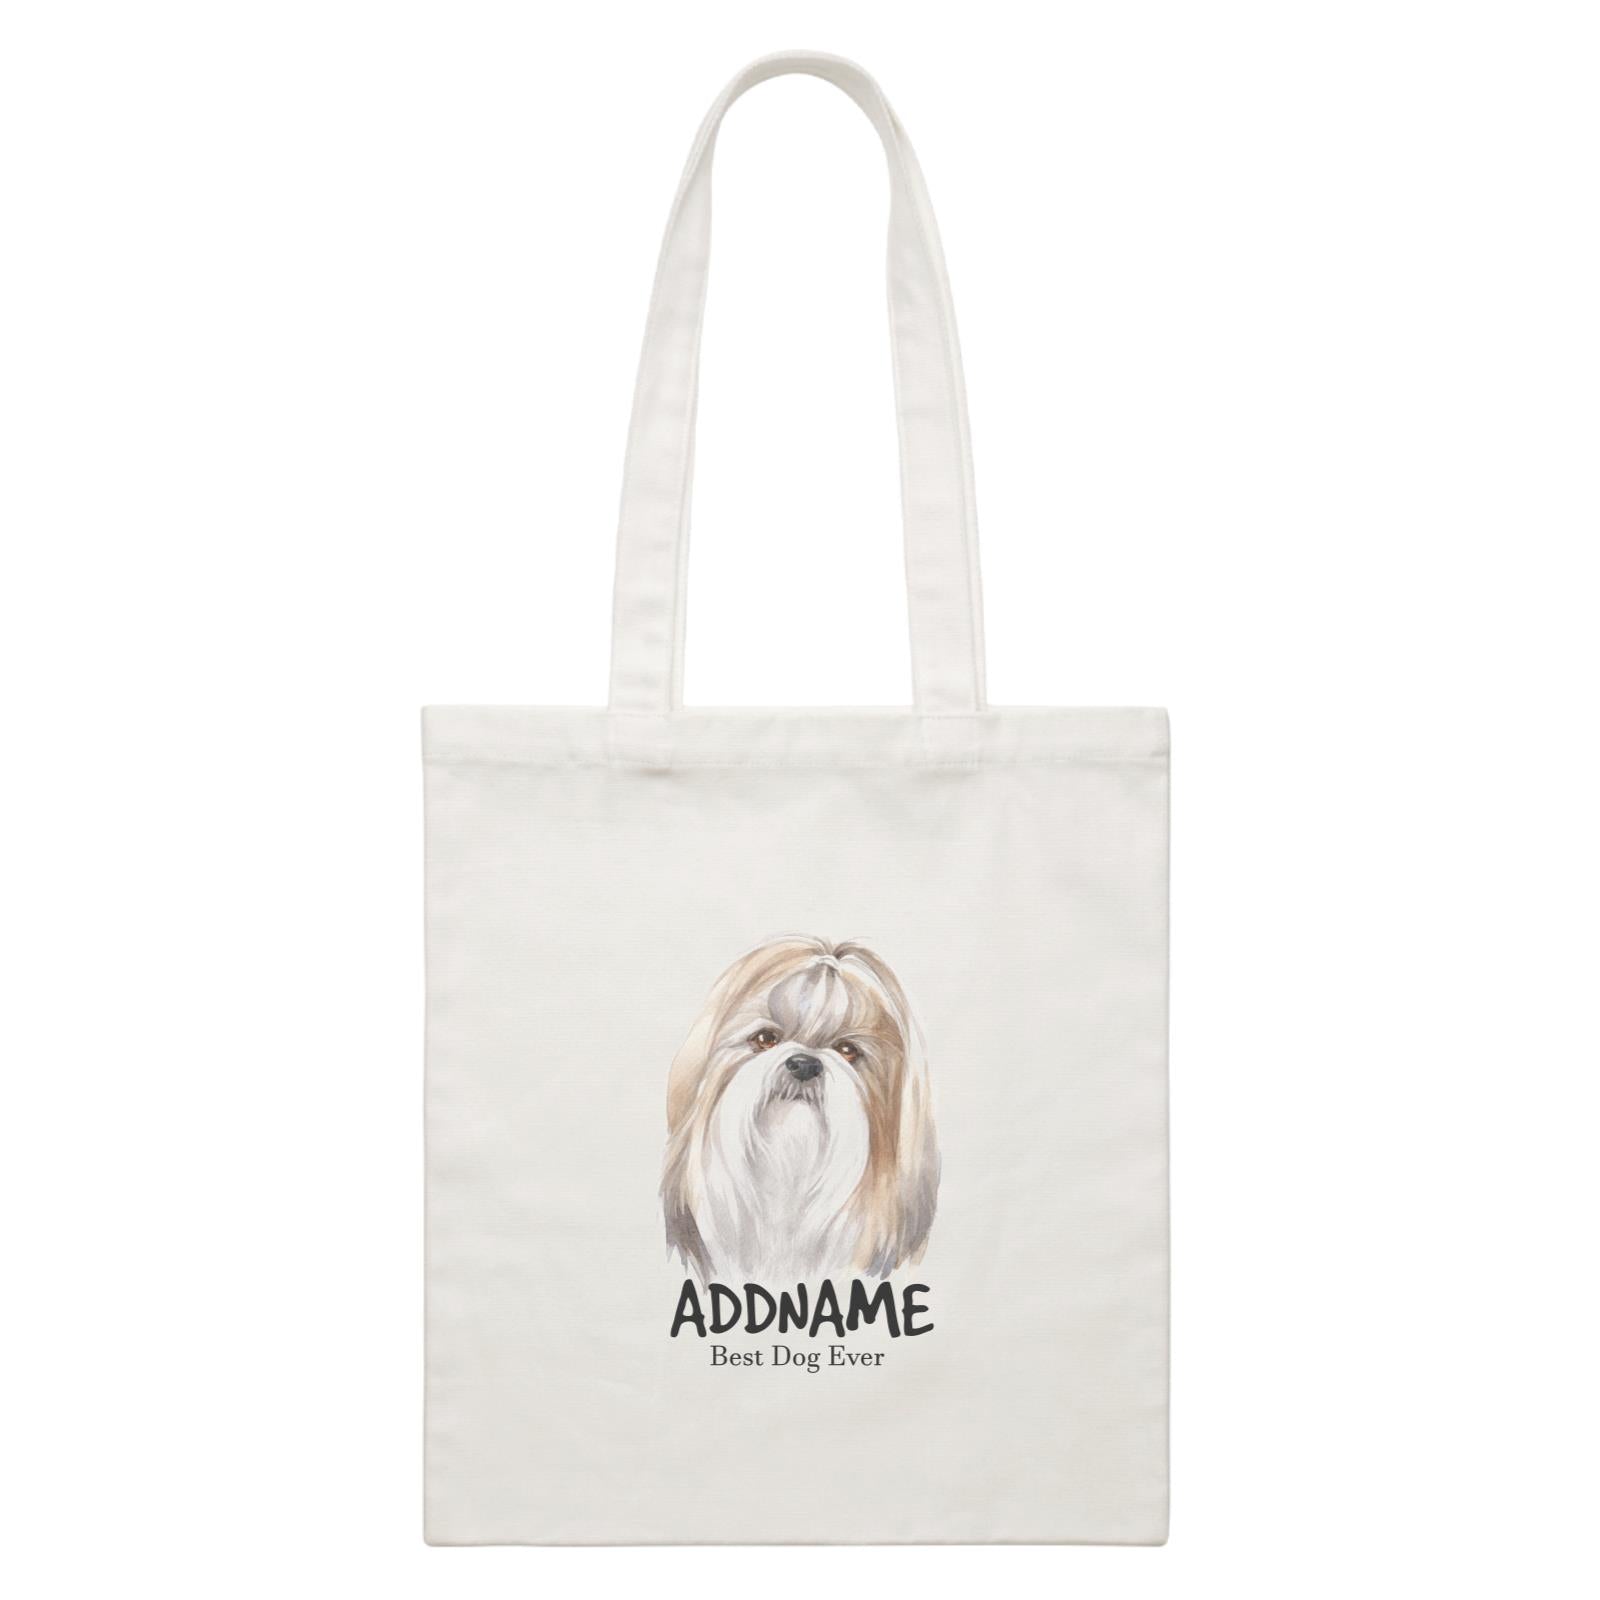 Watercolor Dog Shih Tzu Tie Hair Best Dog Ever Addname White Canvas Bag